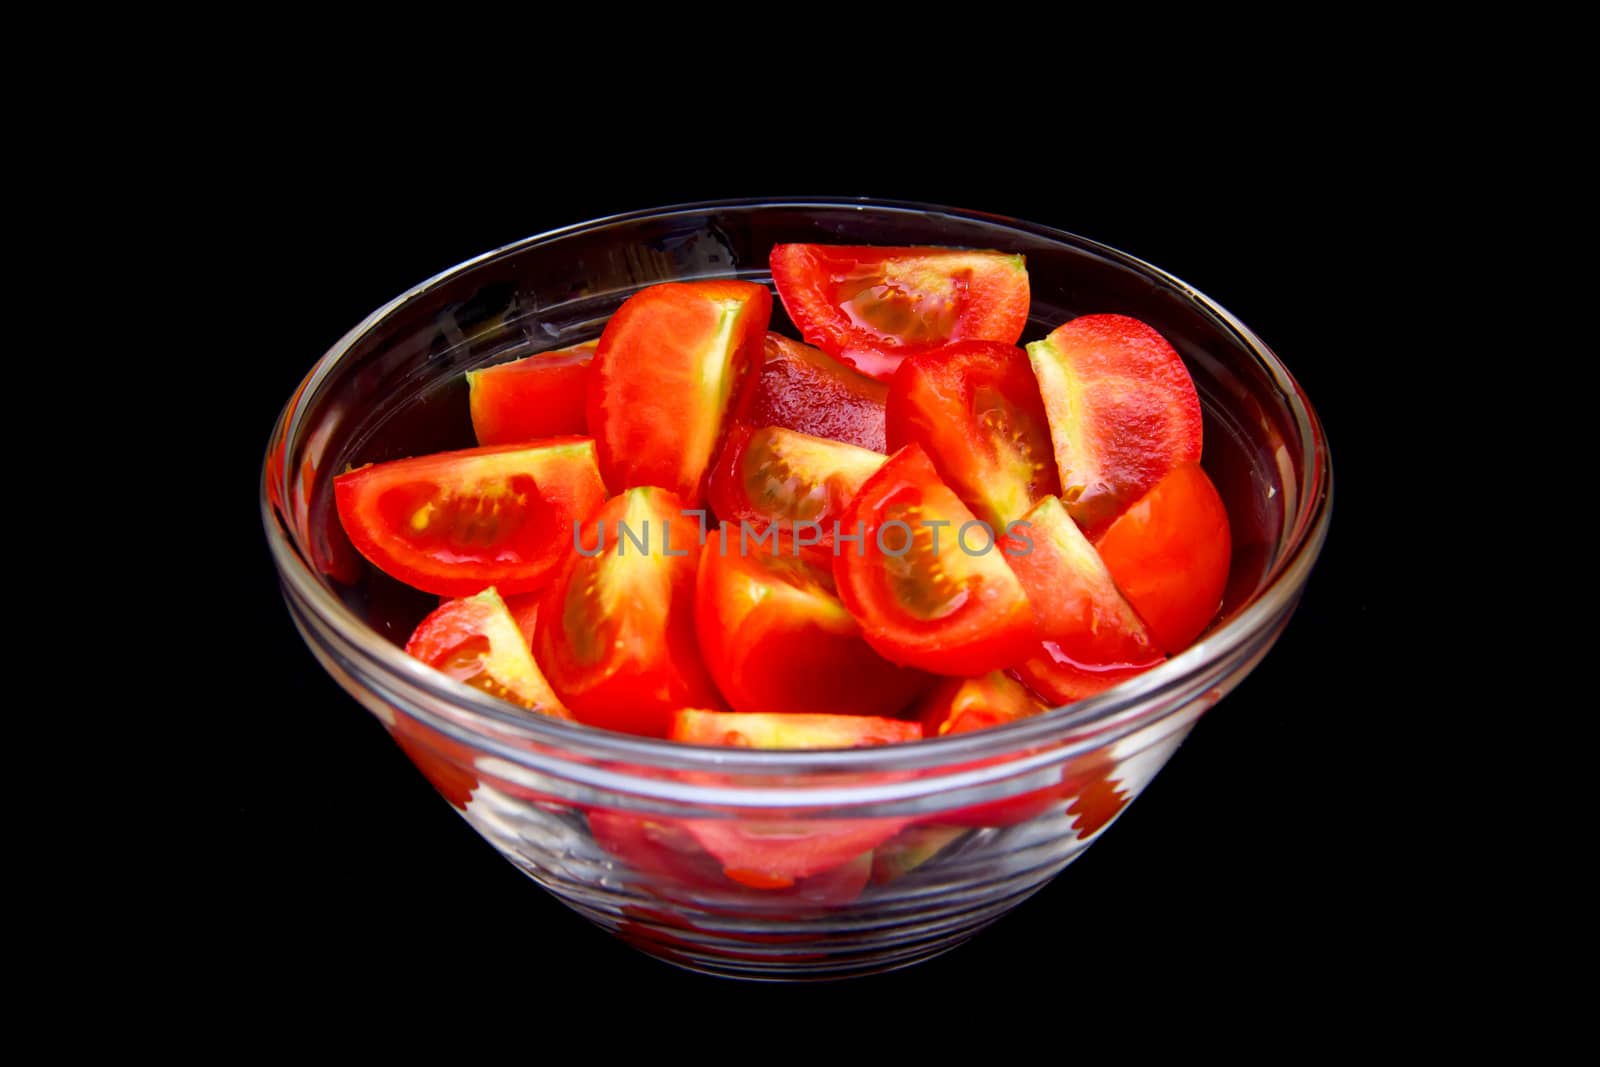 Bowl of tomato wedges on black by spafra